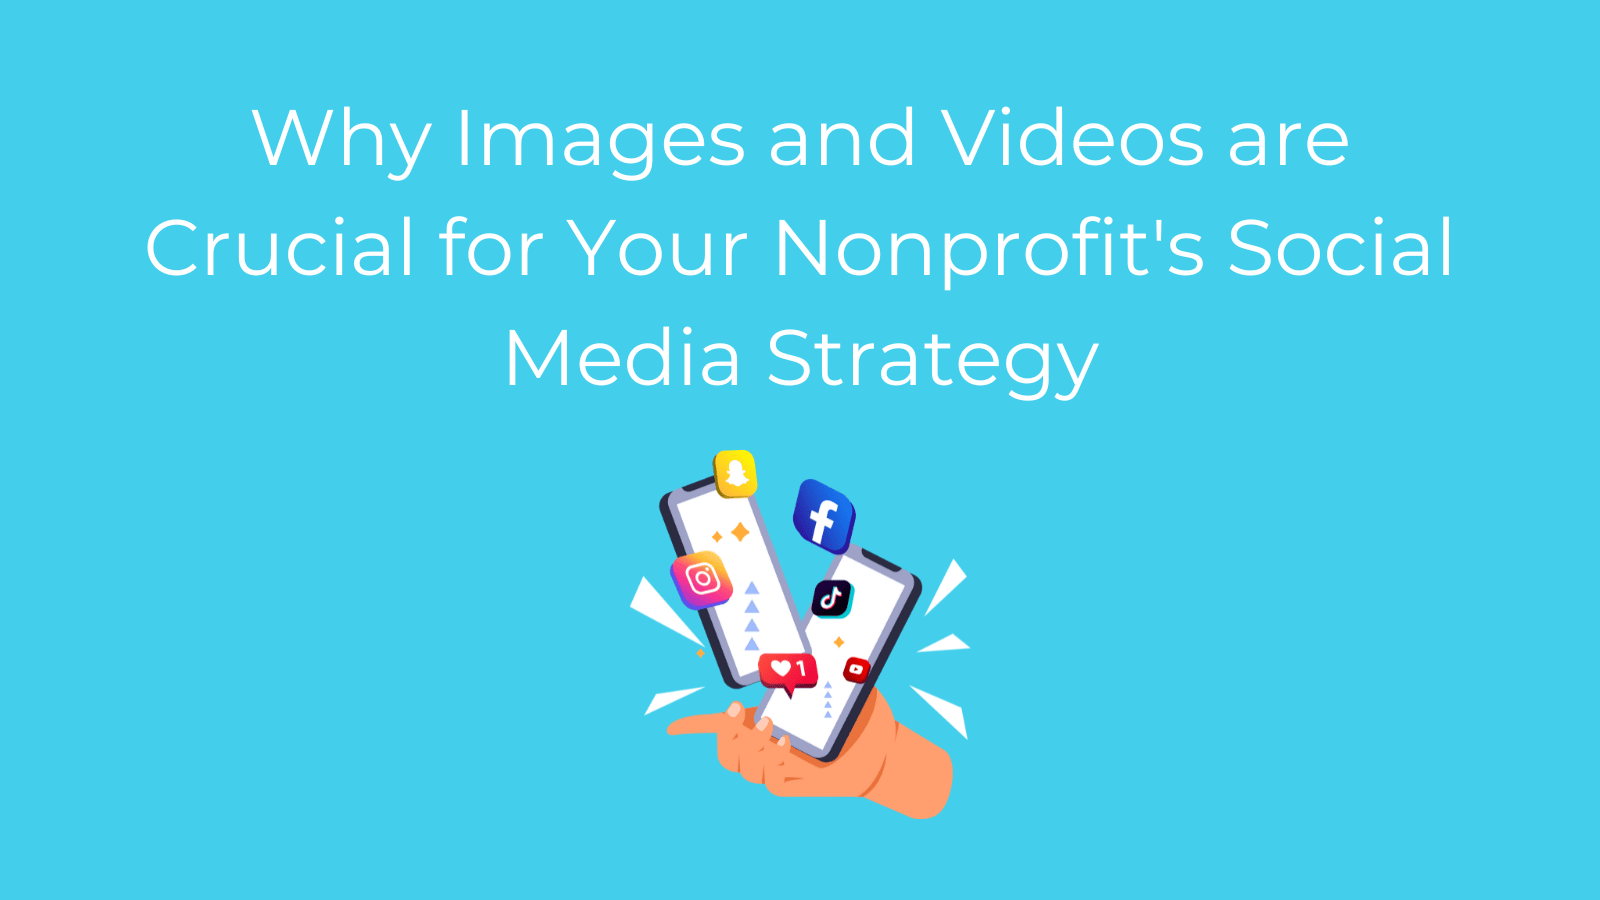 Why Images and Videos are Crucial for Your Nonprofit's Social Media Strategy